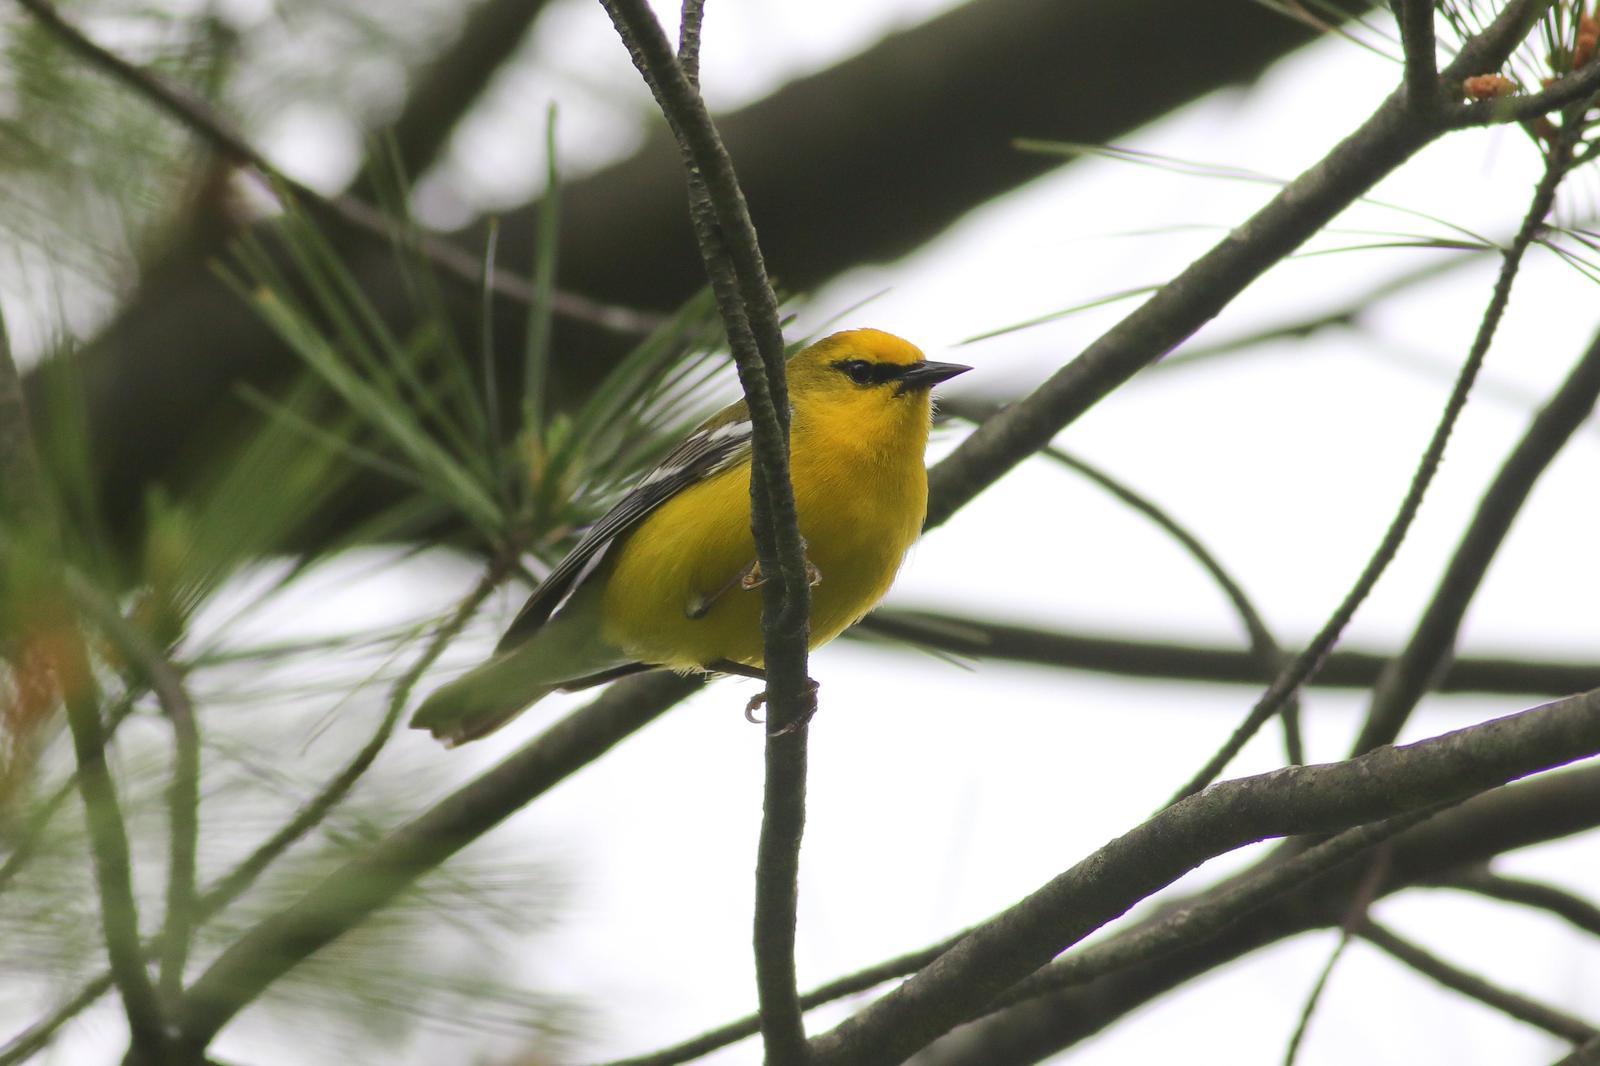 Blue-winged Warbler Photo by Tom Ford-Hutchinson